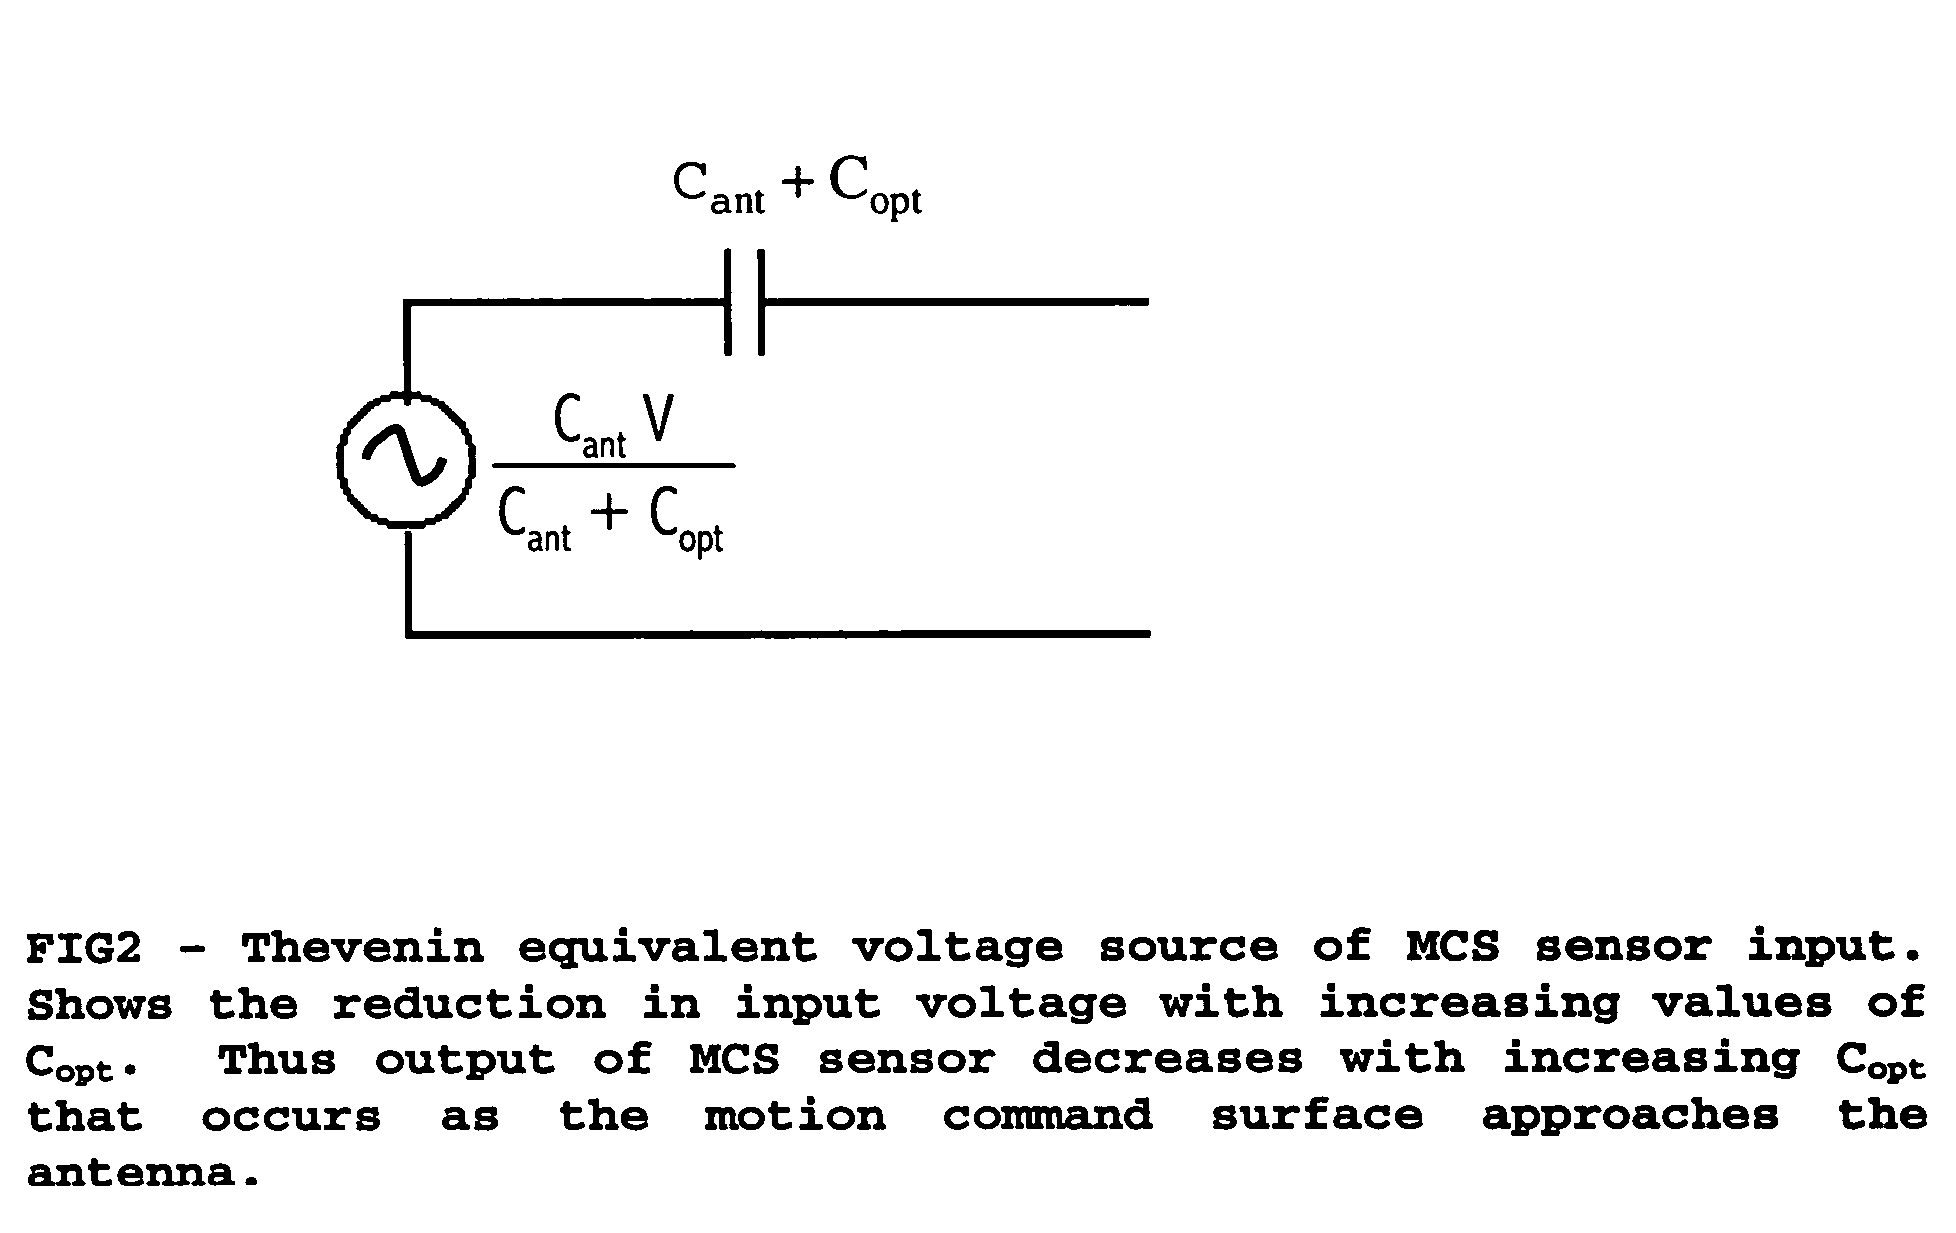 Patent application for a computer motional command interface